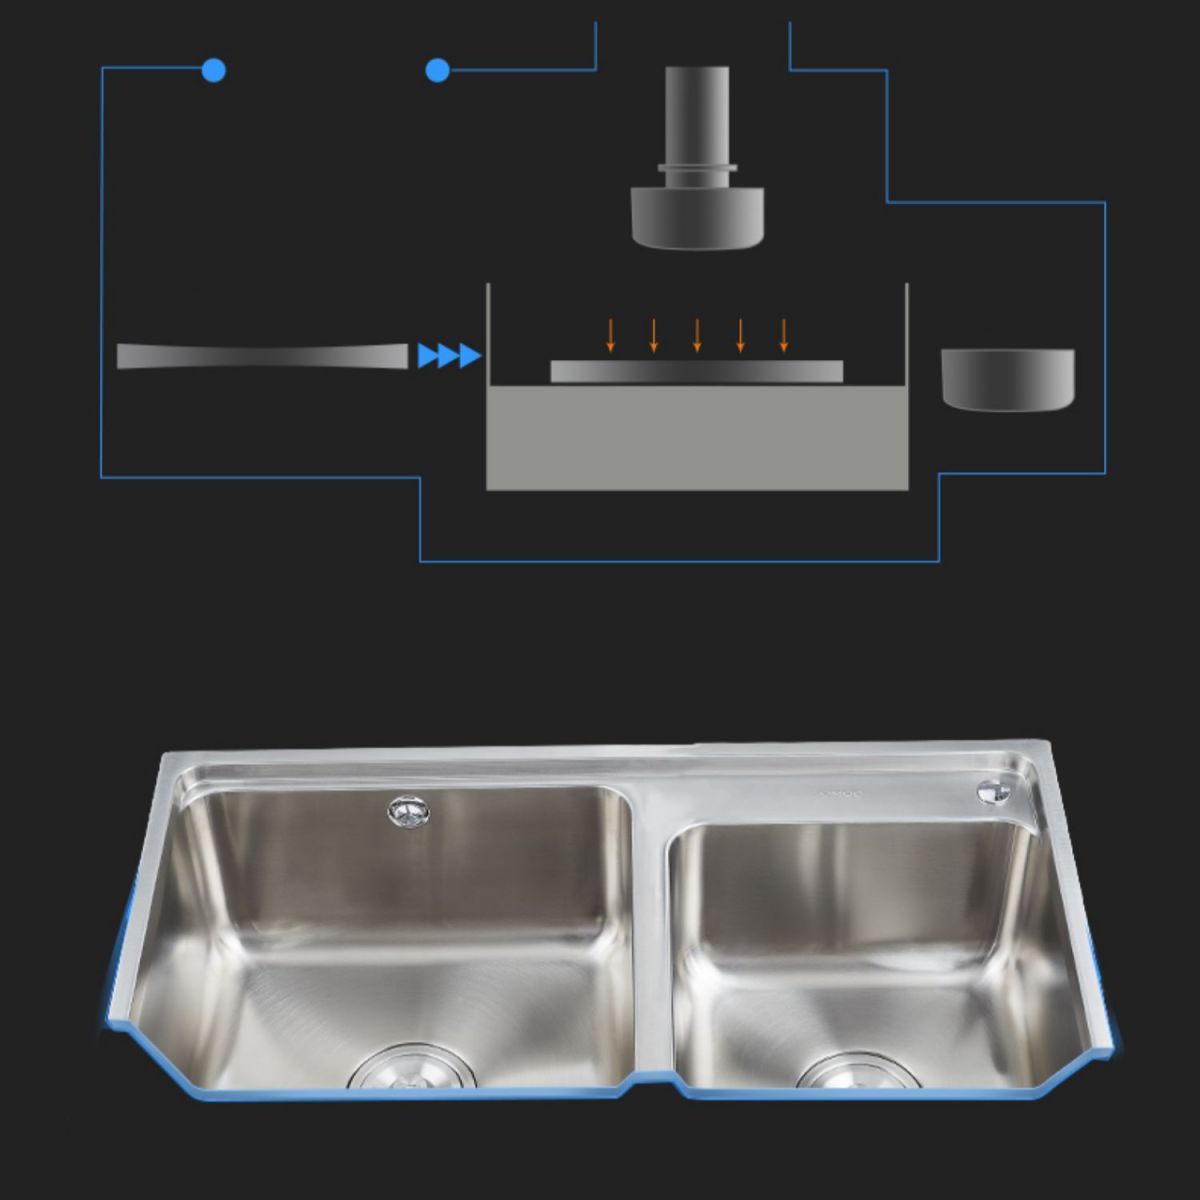 Stainless Steel Kitchen Double Sink Drop-In Kitchen Sink with Drain Assembly